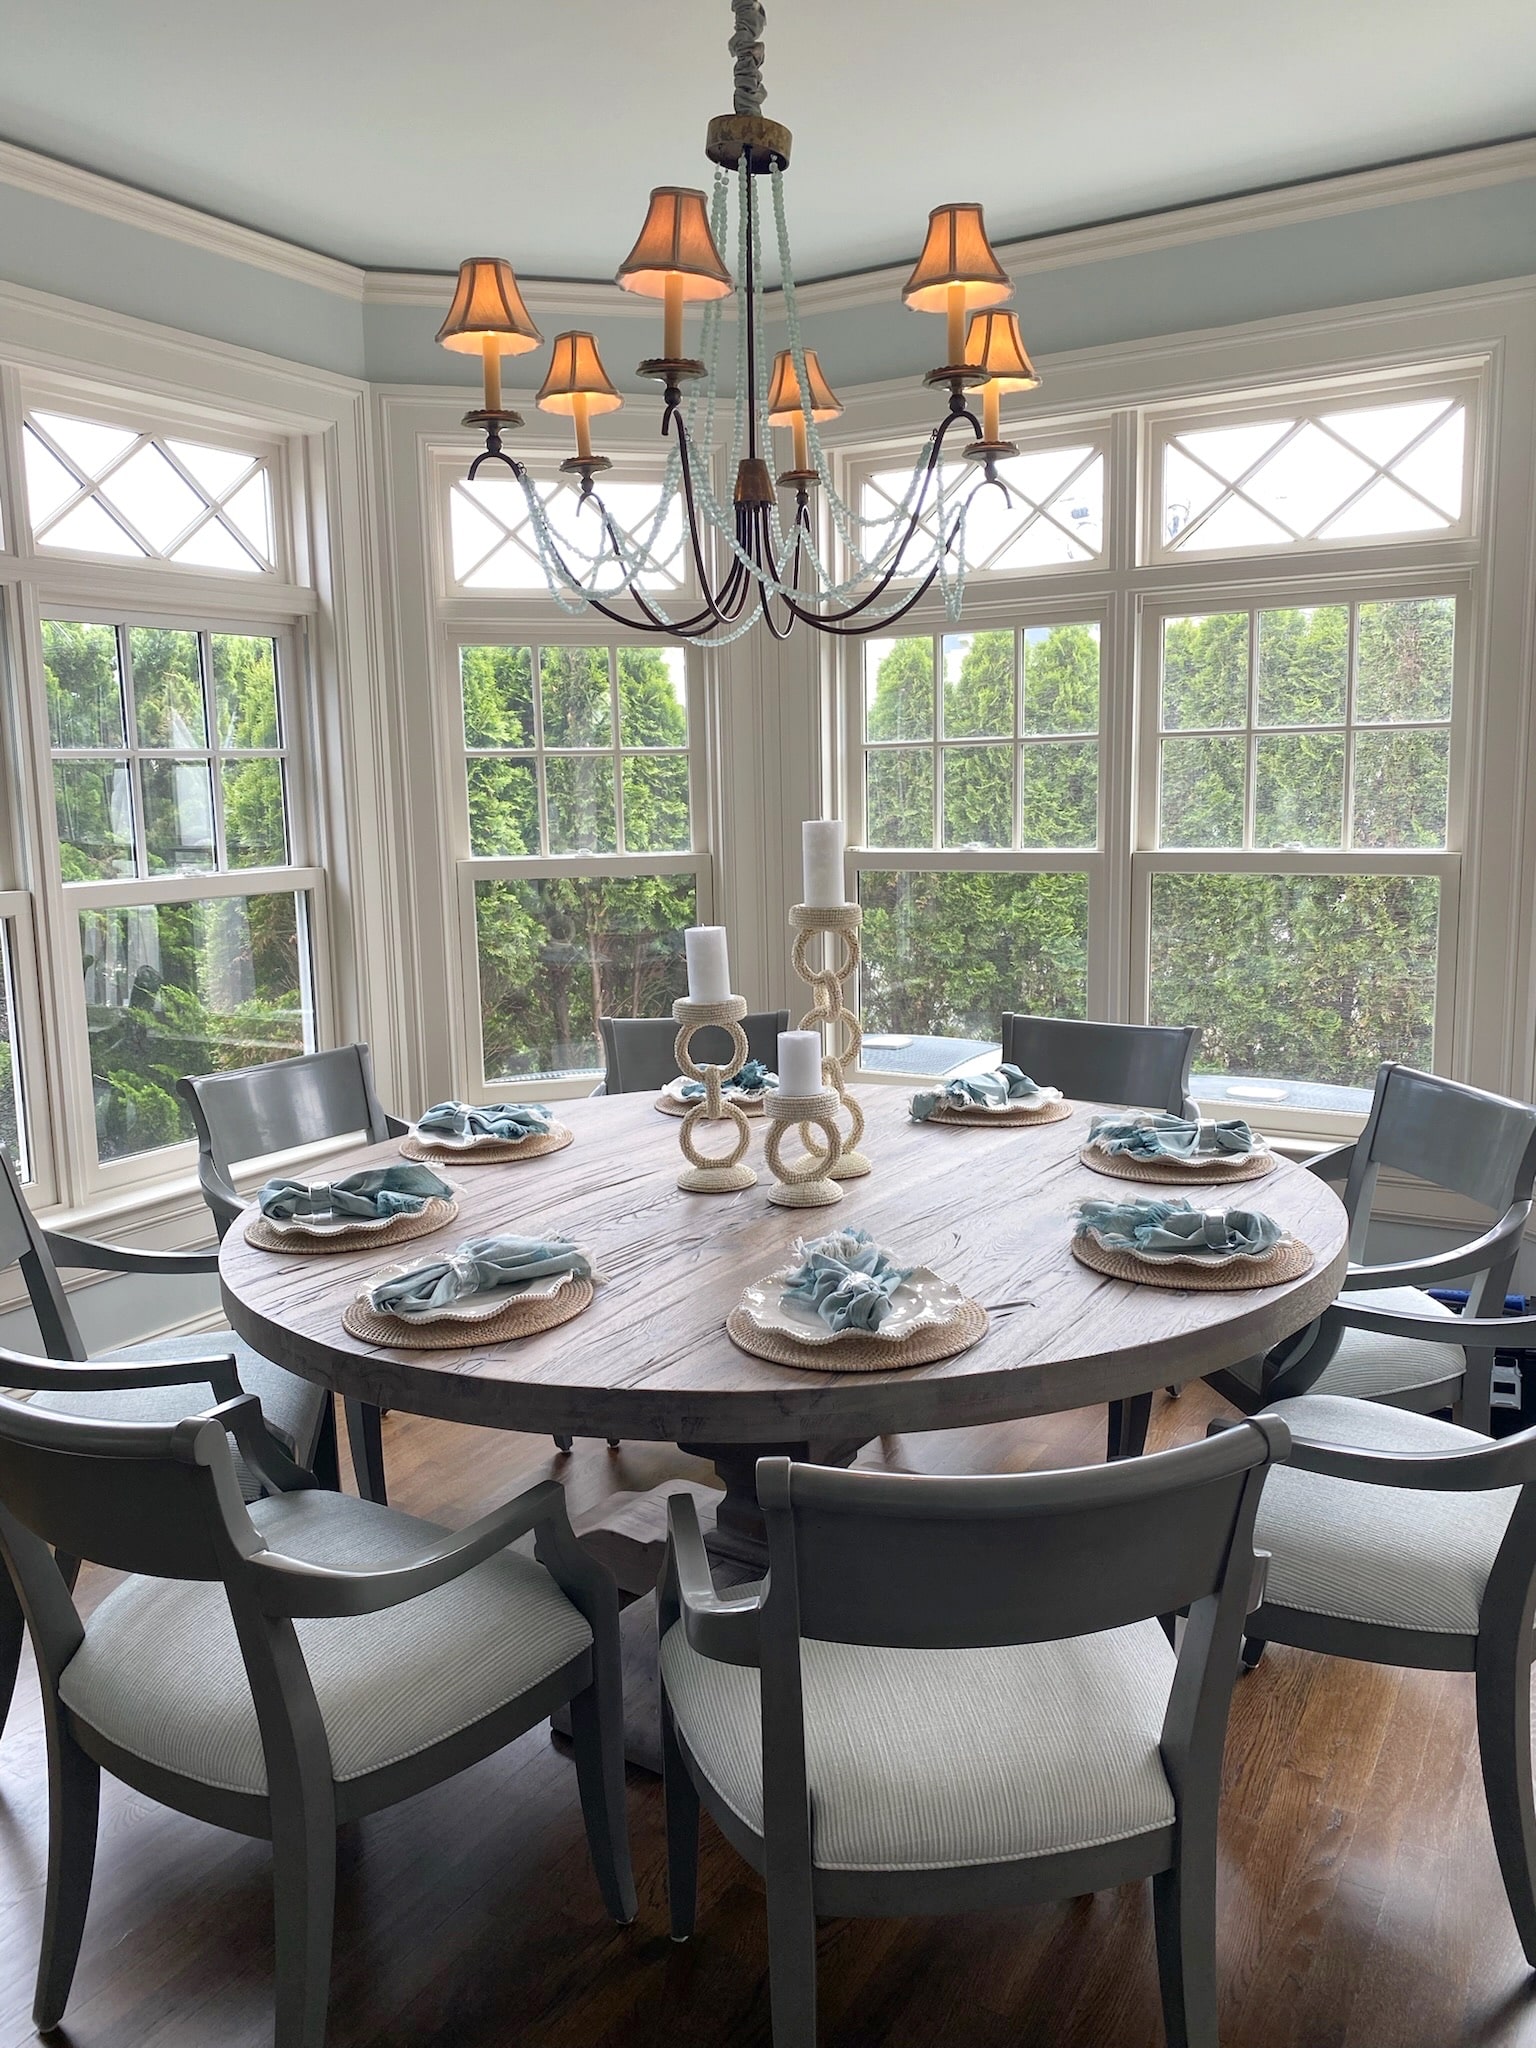 A dining room with a round table and chairs featuring a stunning interior design.